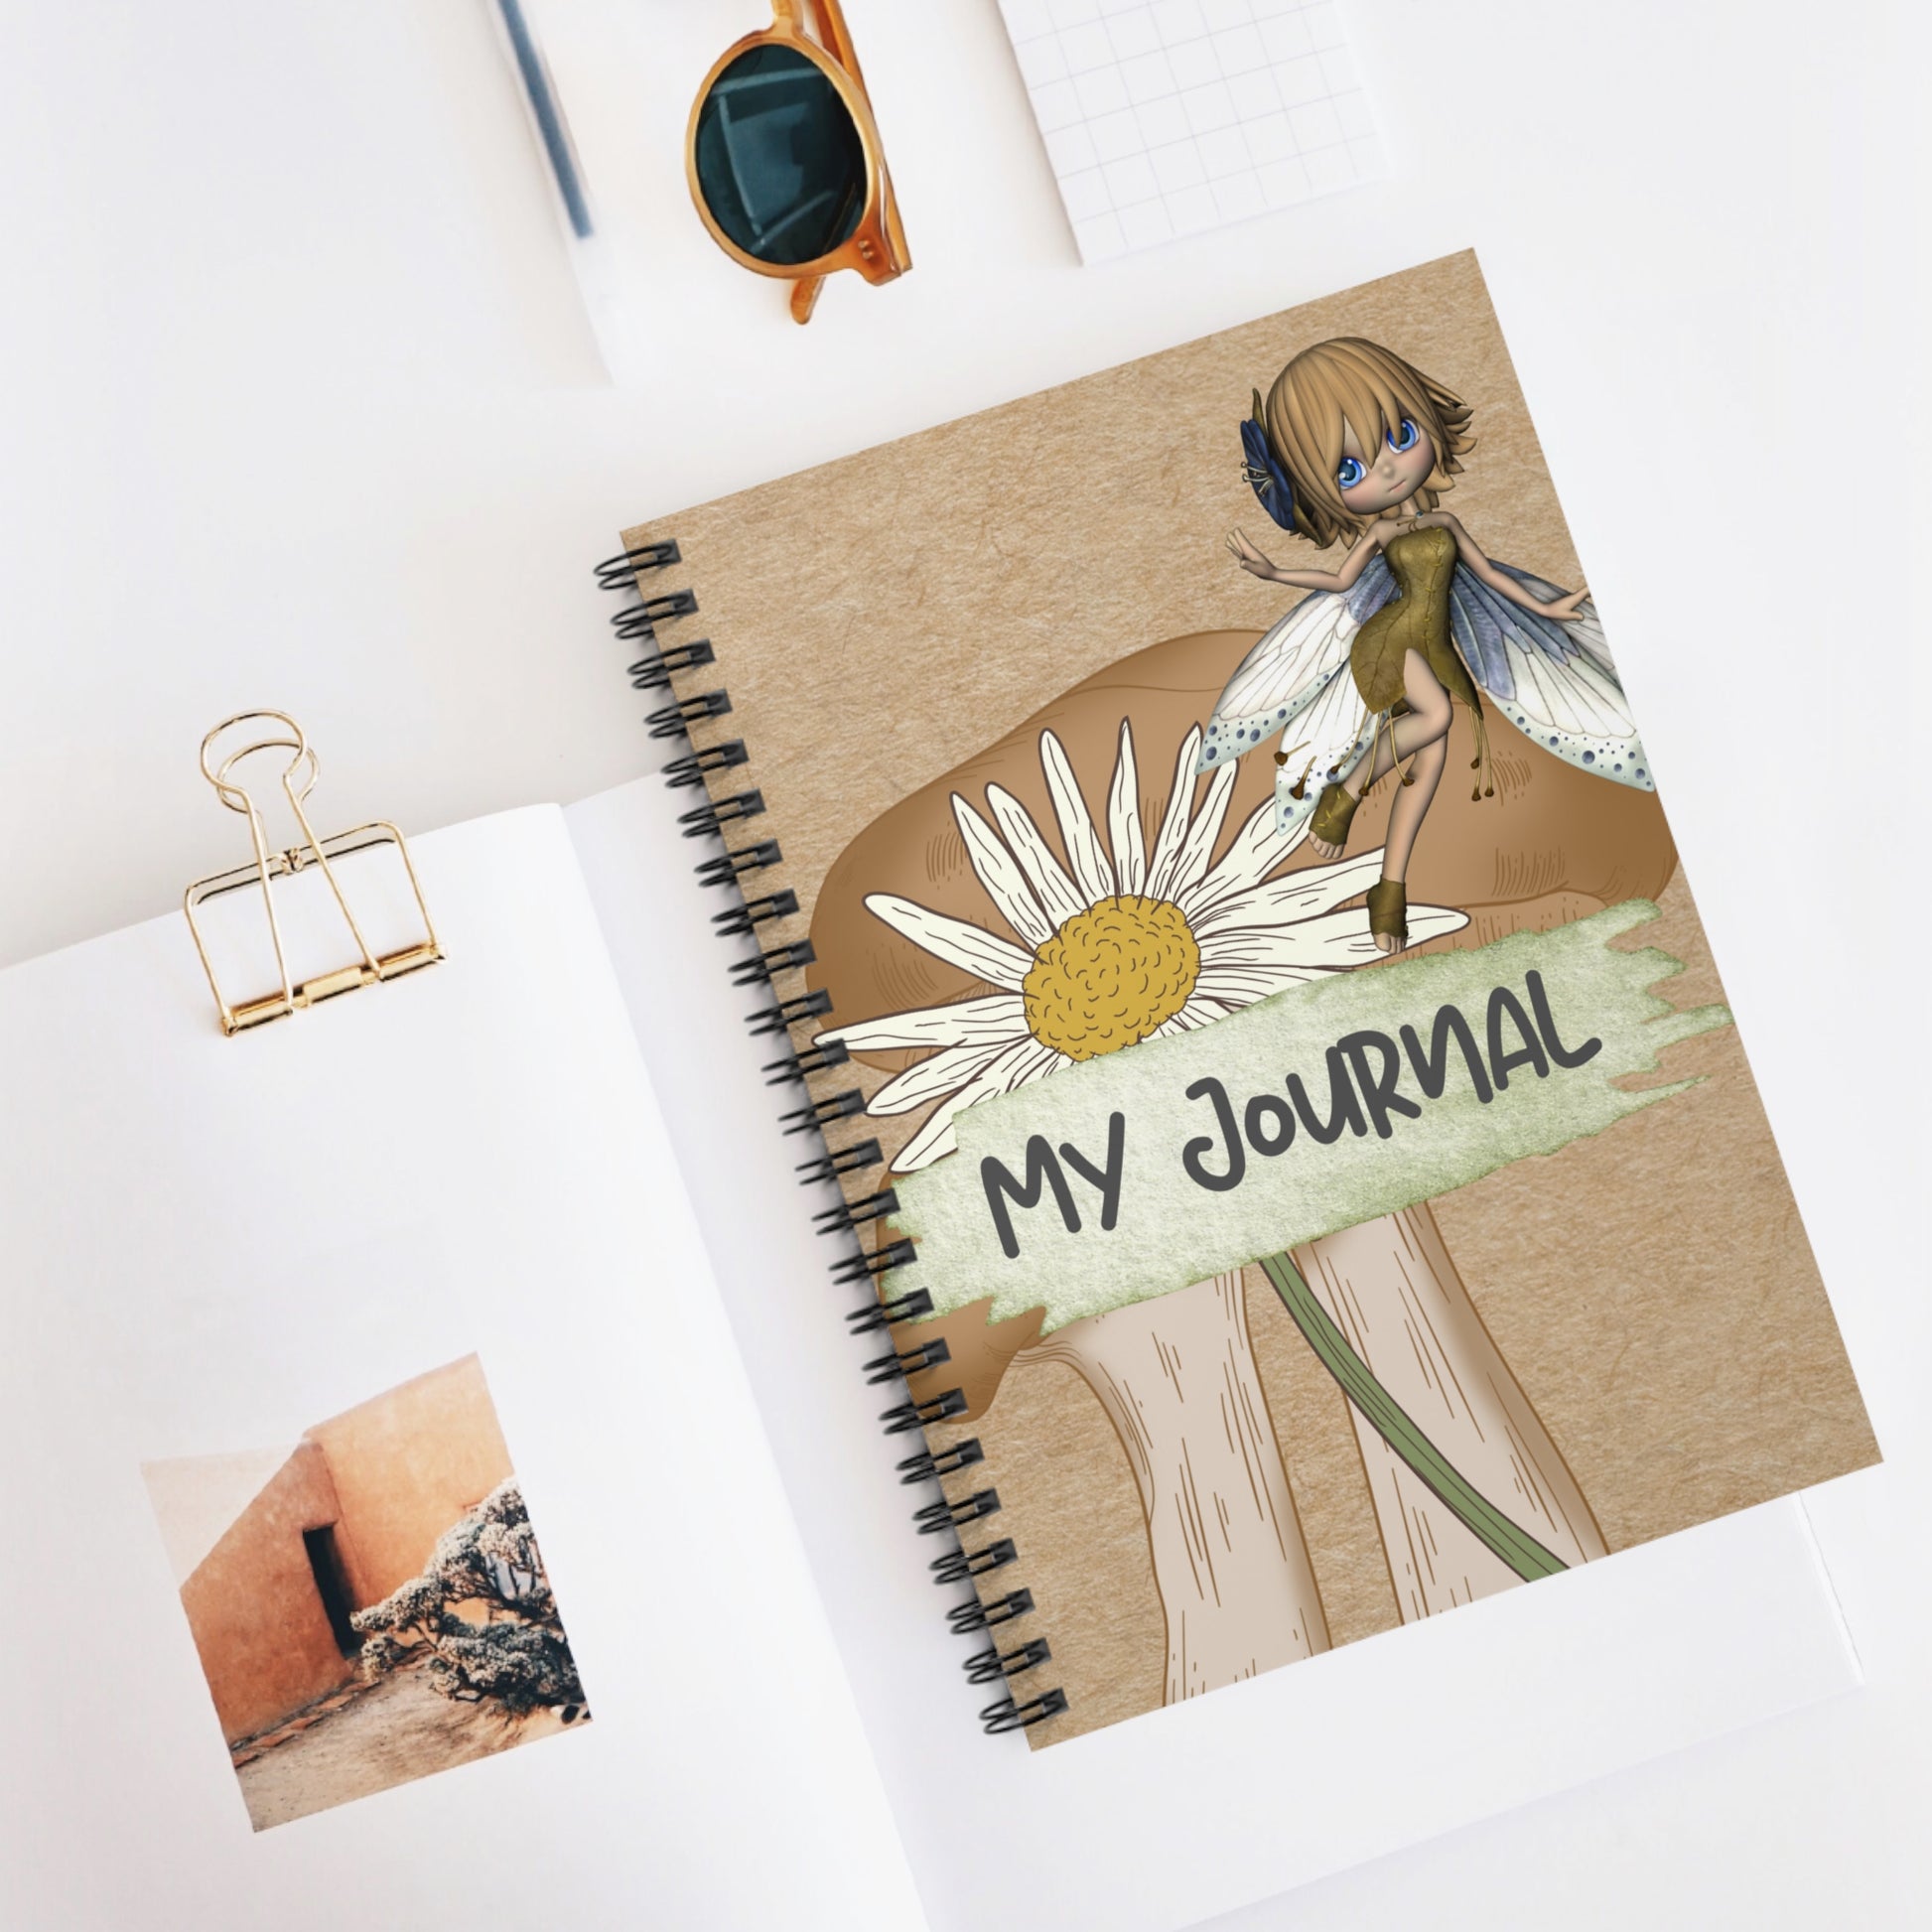 My Journal Fairy Sunflower Spiral Notebook -Ruled Line Paper products Krazy Heart Designs Boutique   